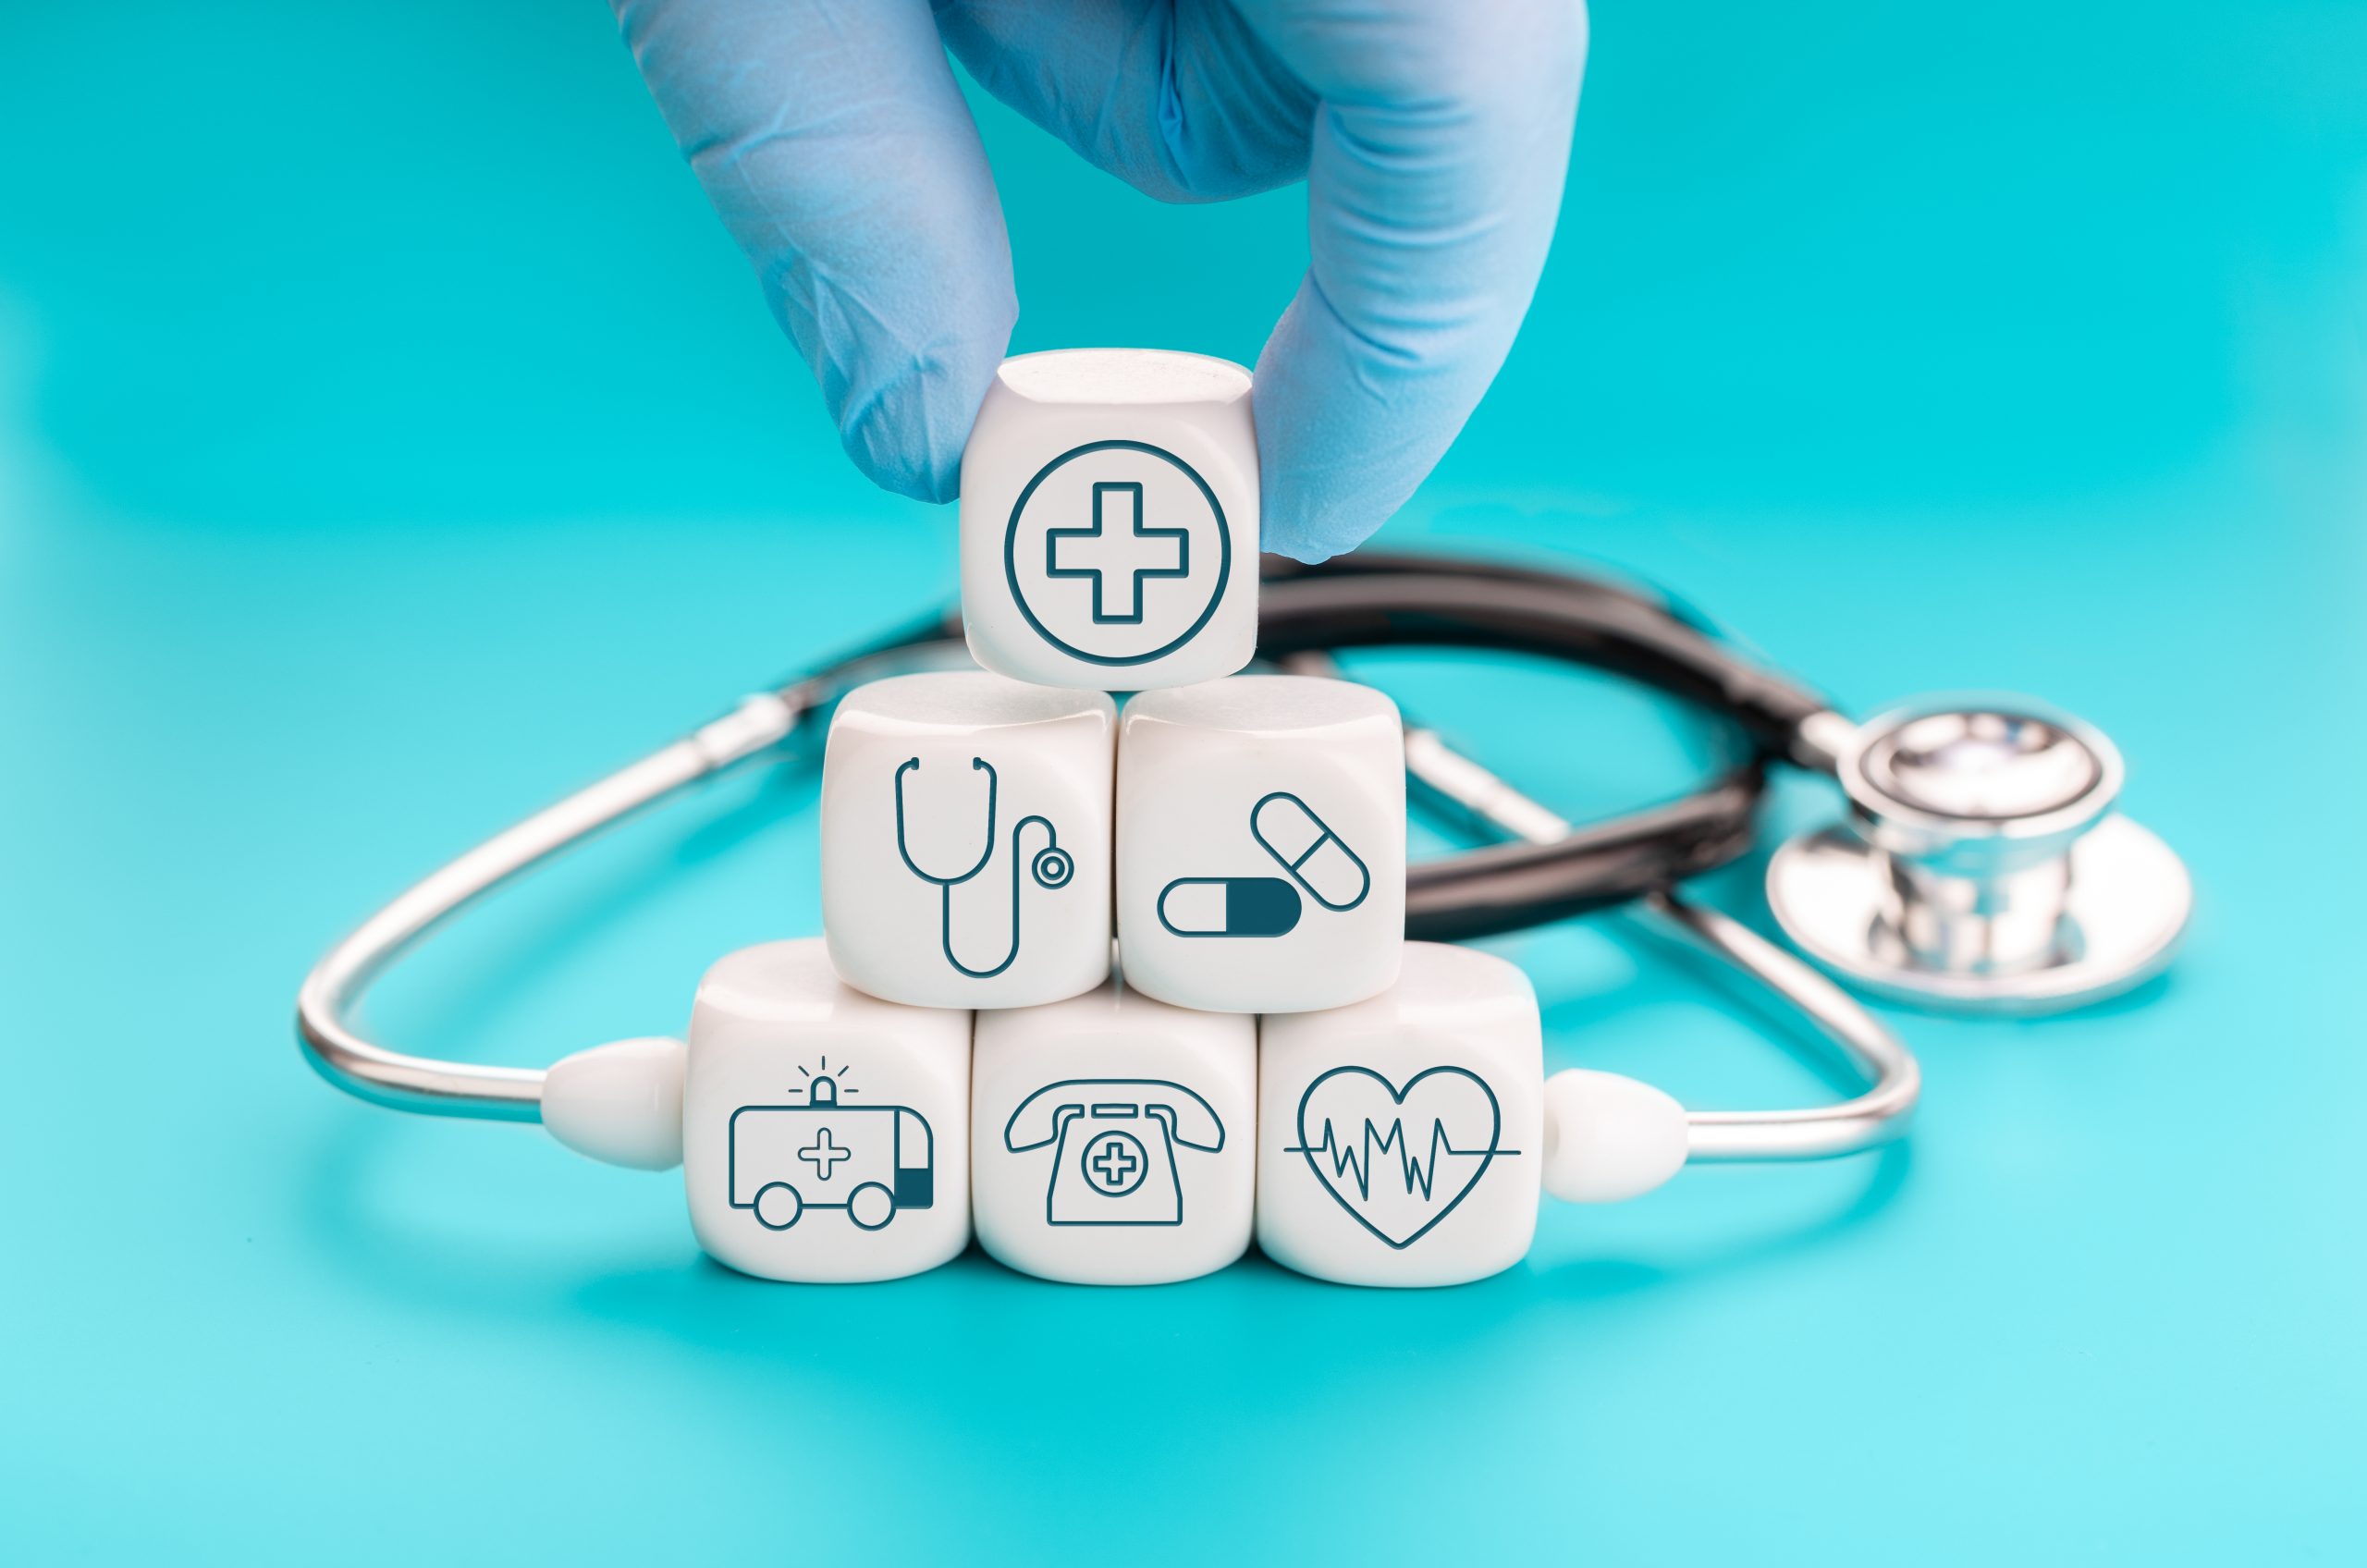 Health insurance concept. Medical symbols on cube shape blocks and Hand holding a block with healthcare medical icon